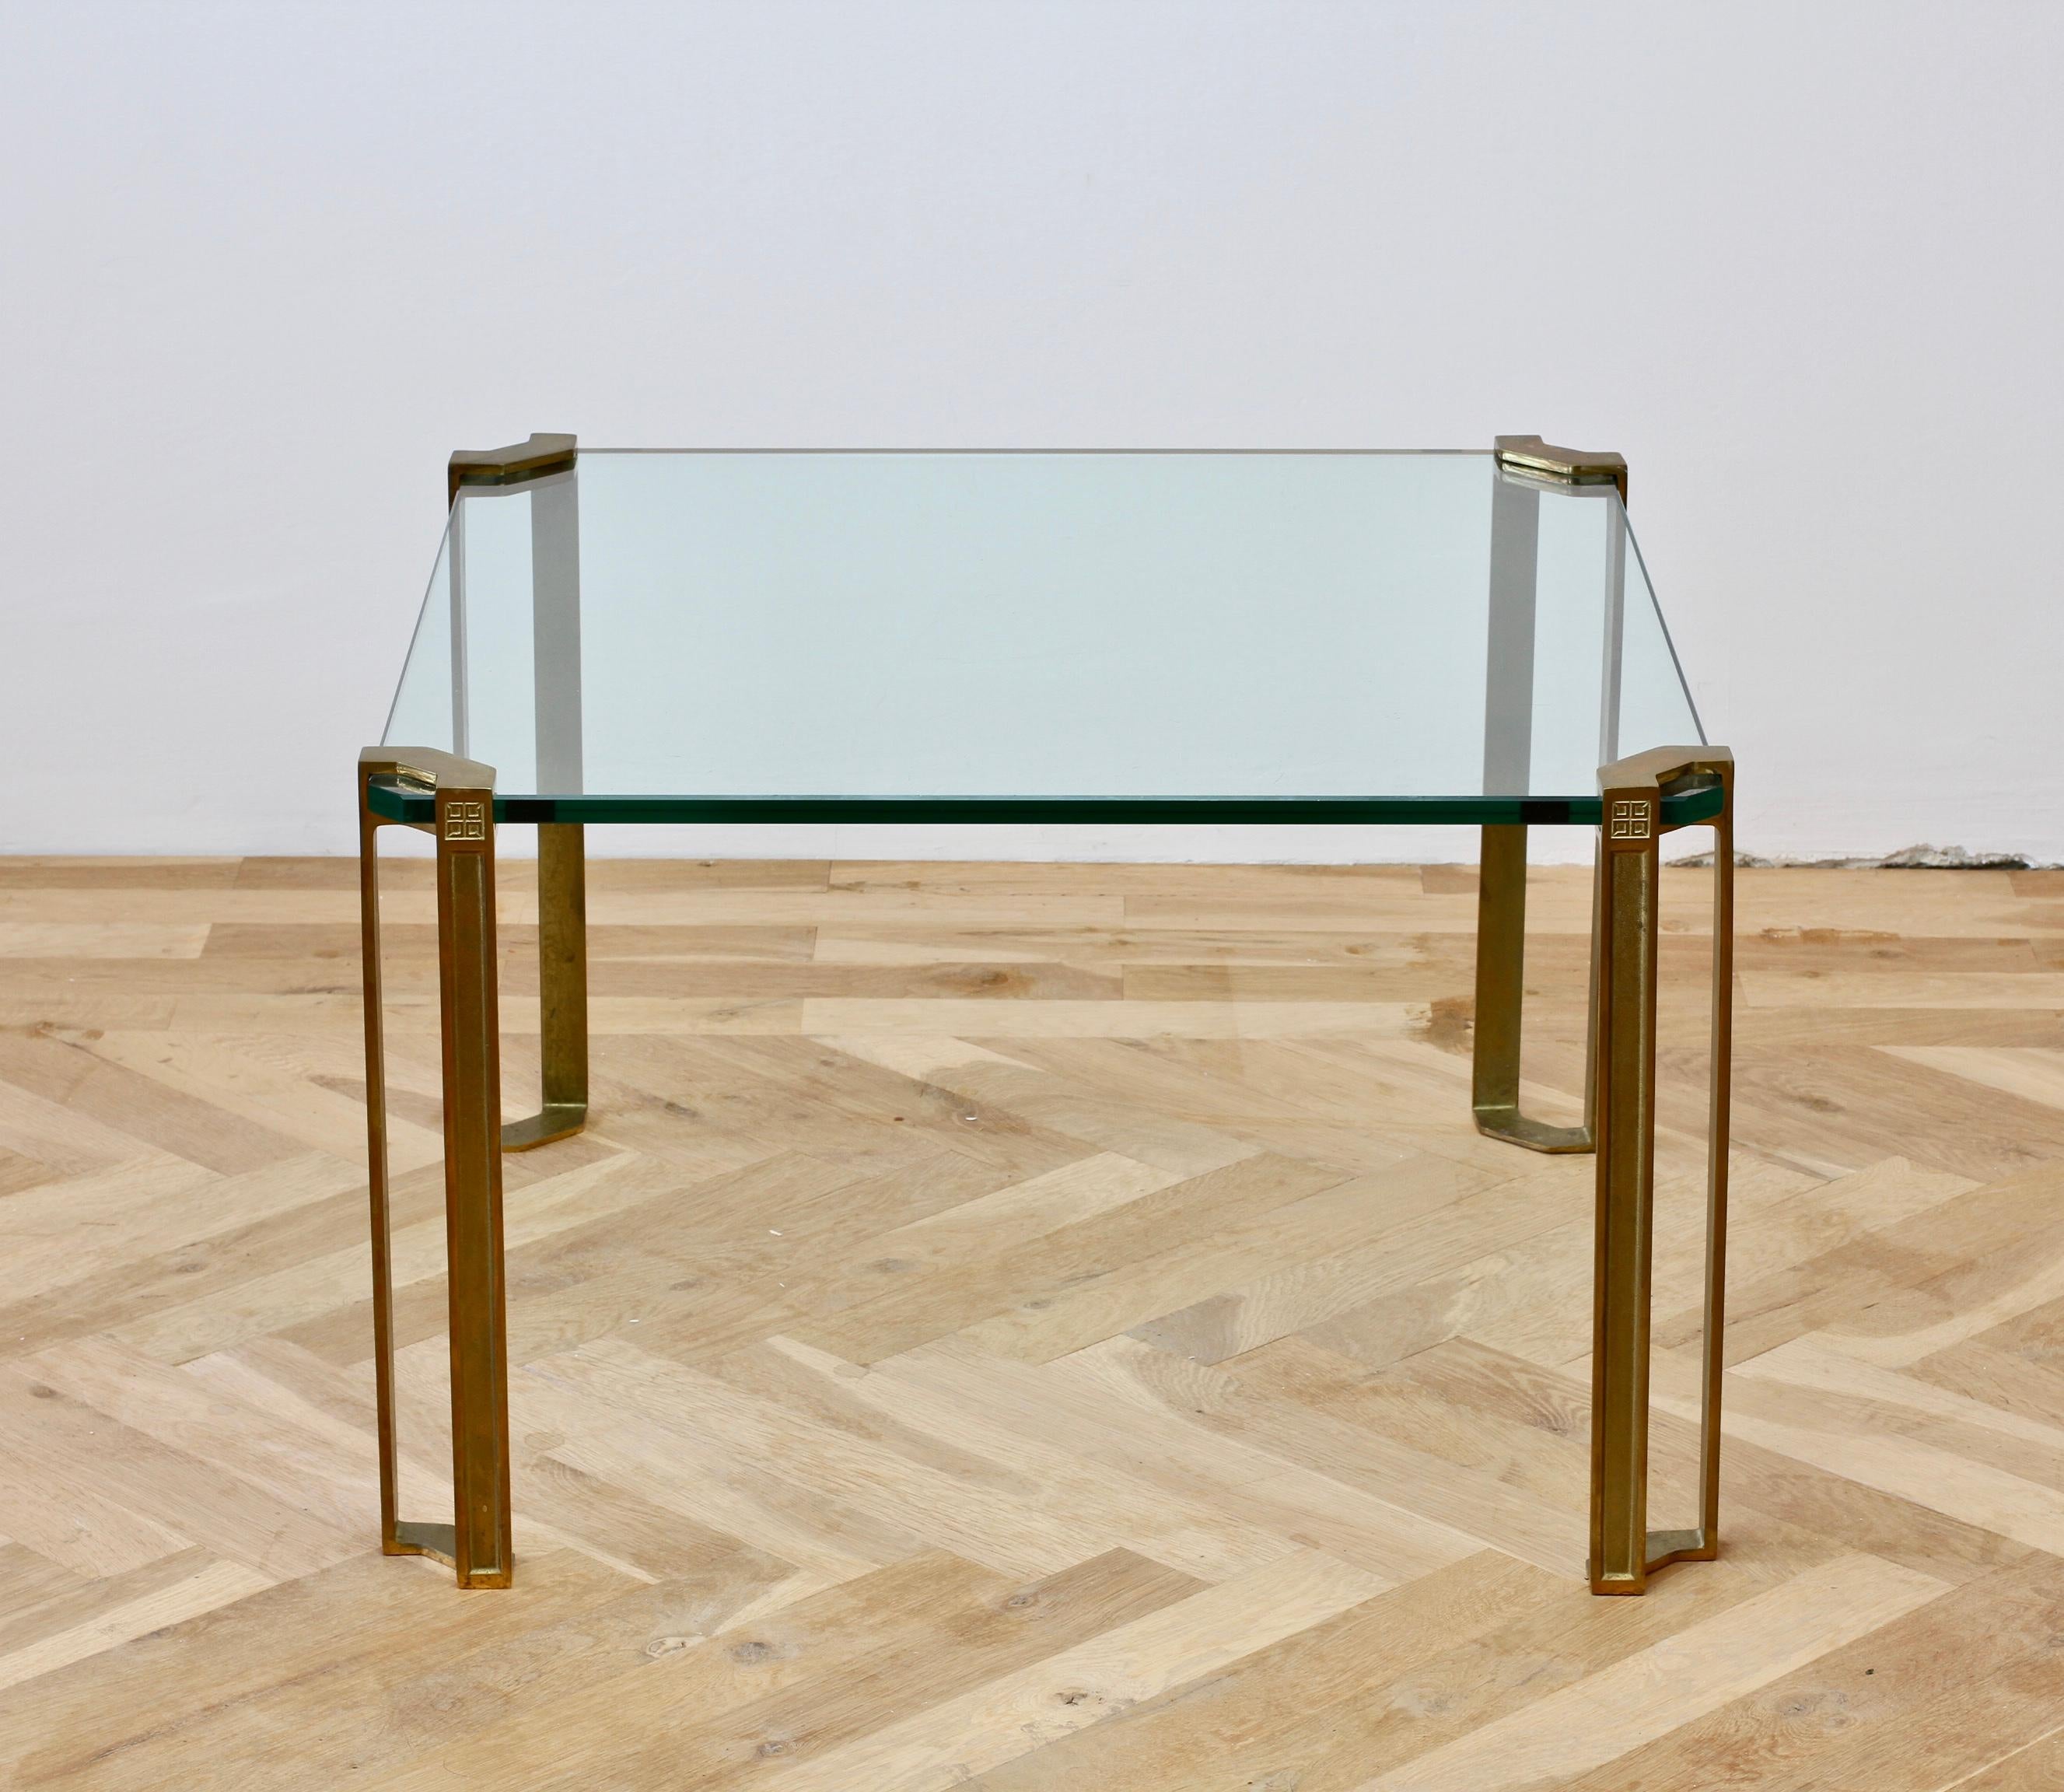 Pair of Peter Ghyczy 'T24 Pioneer' square end or coffee tables in cast bronze. Designed by Hungarian born designer Peter Ghyczy circa 1975 / 1980s featuring his pioneering casting techniques and way of suspending glass and metal.

Thick 15mm clear